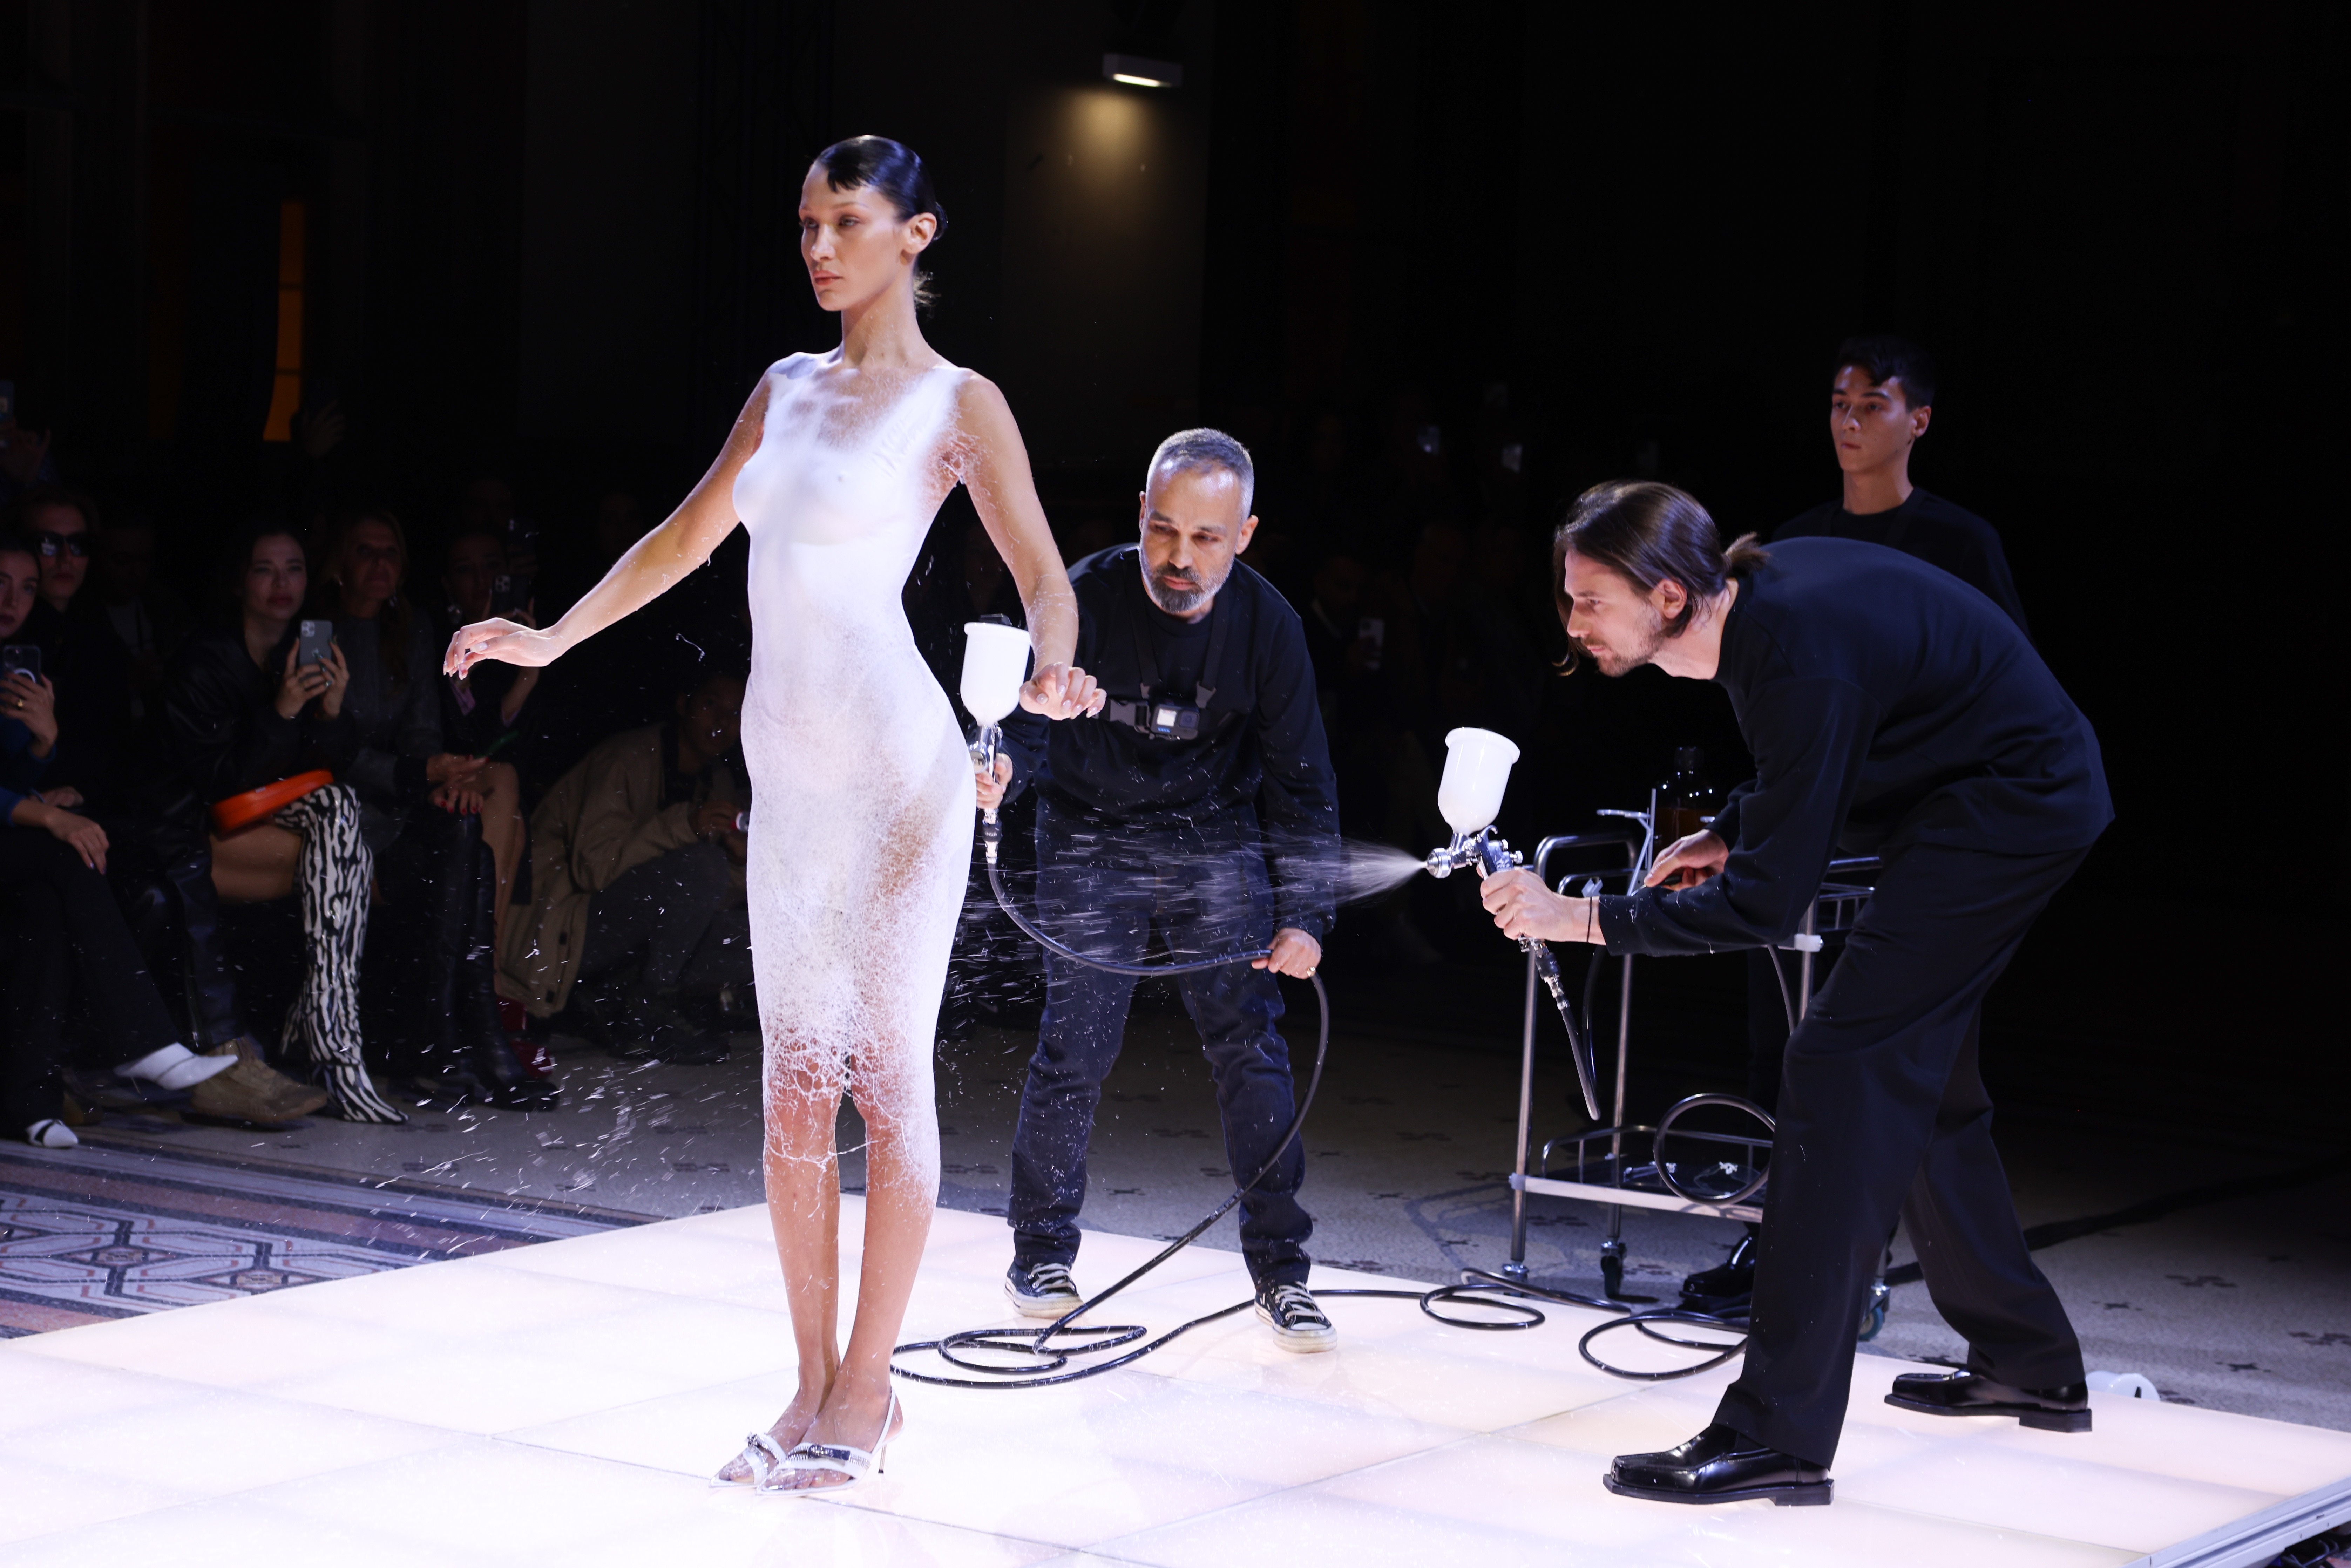 Spring/Summer 2023 Fashion Trends: Bella Hadid closes the Coperni spring/summer 2023 fashion show, having a dress sprayed on to her body